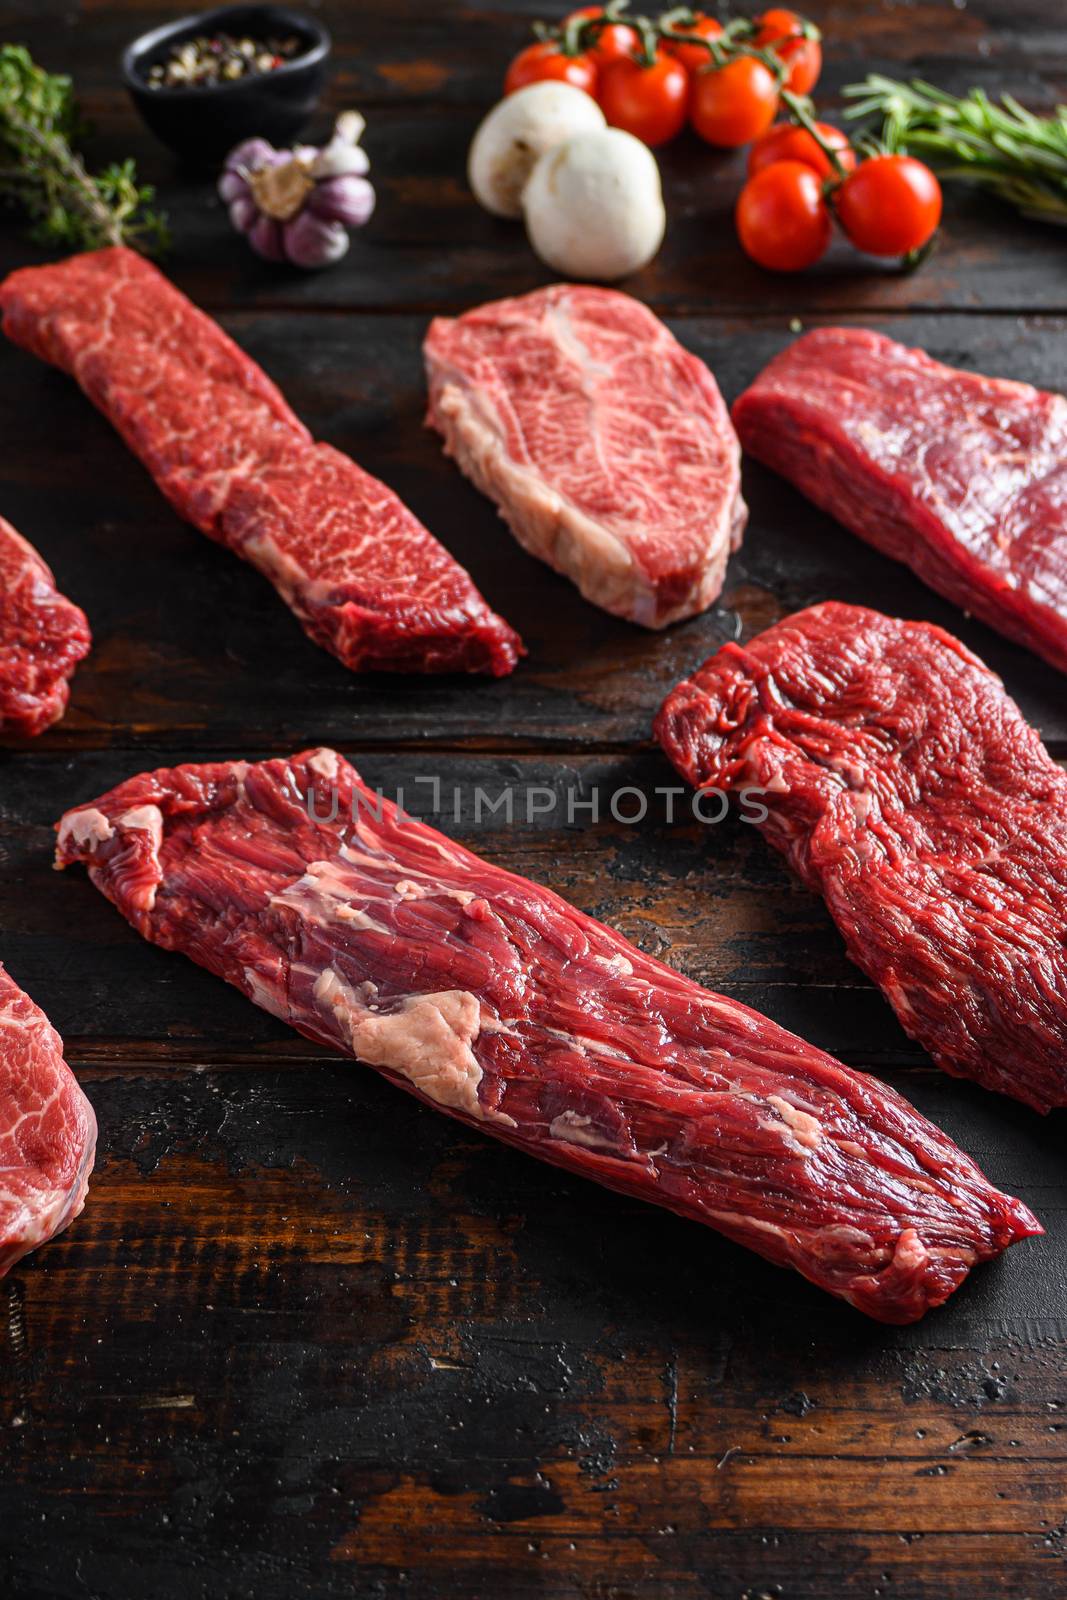 Alternative beef cut machete skirt steak close up in front of other cuts in butchery on old wood table side view selective focus vertical by Ilianesolenyi